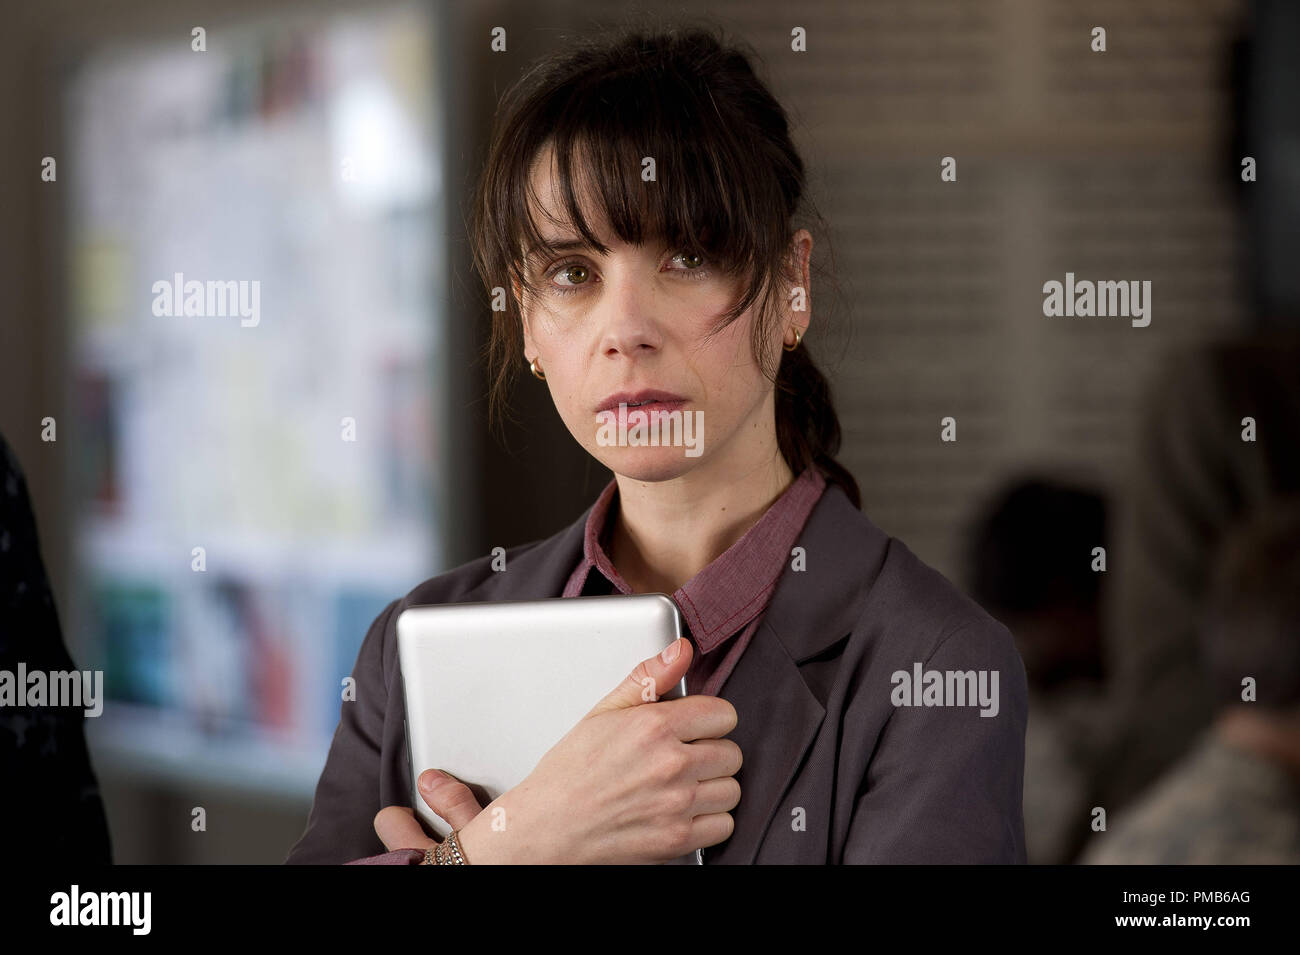 SALLY HAWKINS as Dr. Vivienne Graham in Warner Bros. Pictures' and Legendary Pictures' epic action adventure 'GODZILLA,' a Warner Bros. Pictures release. Stock Photo